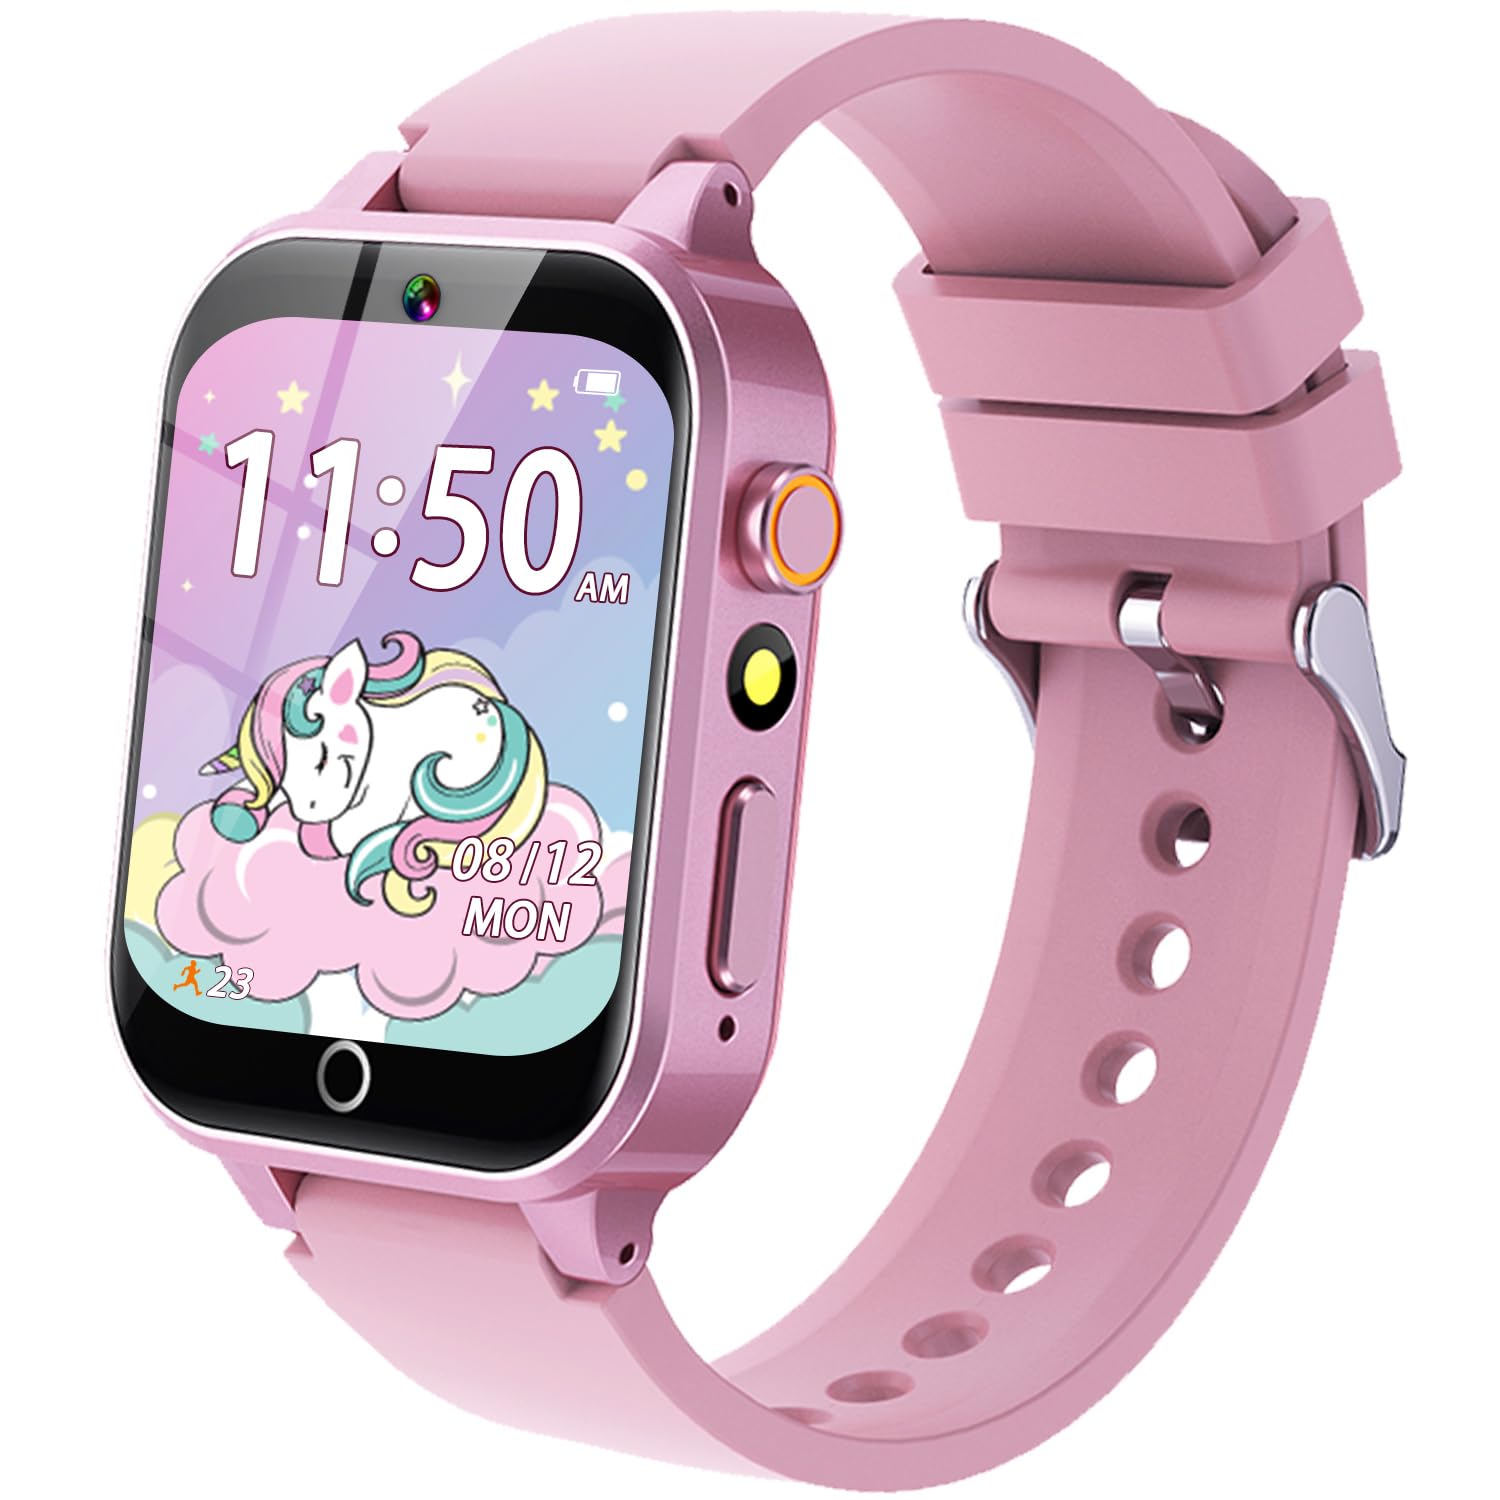 Kids Smart Watch Girls Gift for Girls Aged 6-12, HD TouchScreen Kids Watch with 26 Games Video Camera Music Pedometer Audiostory Learn Card Educational Toys Birthday Gifts for Girls Ages 5 6 7 8 9